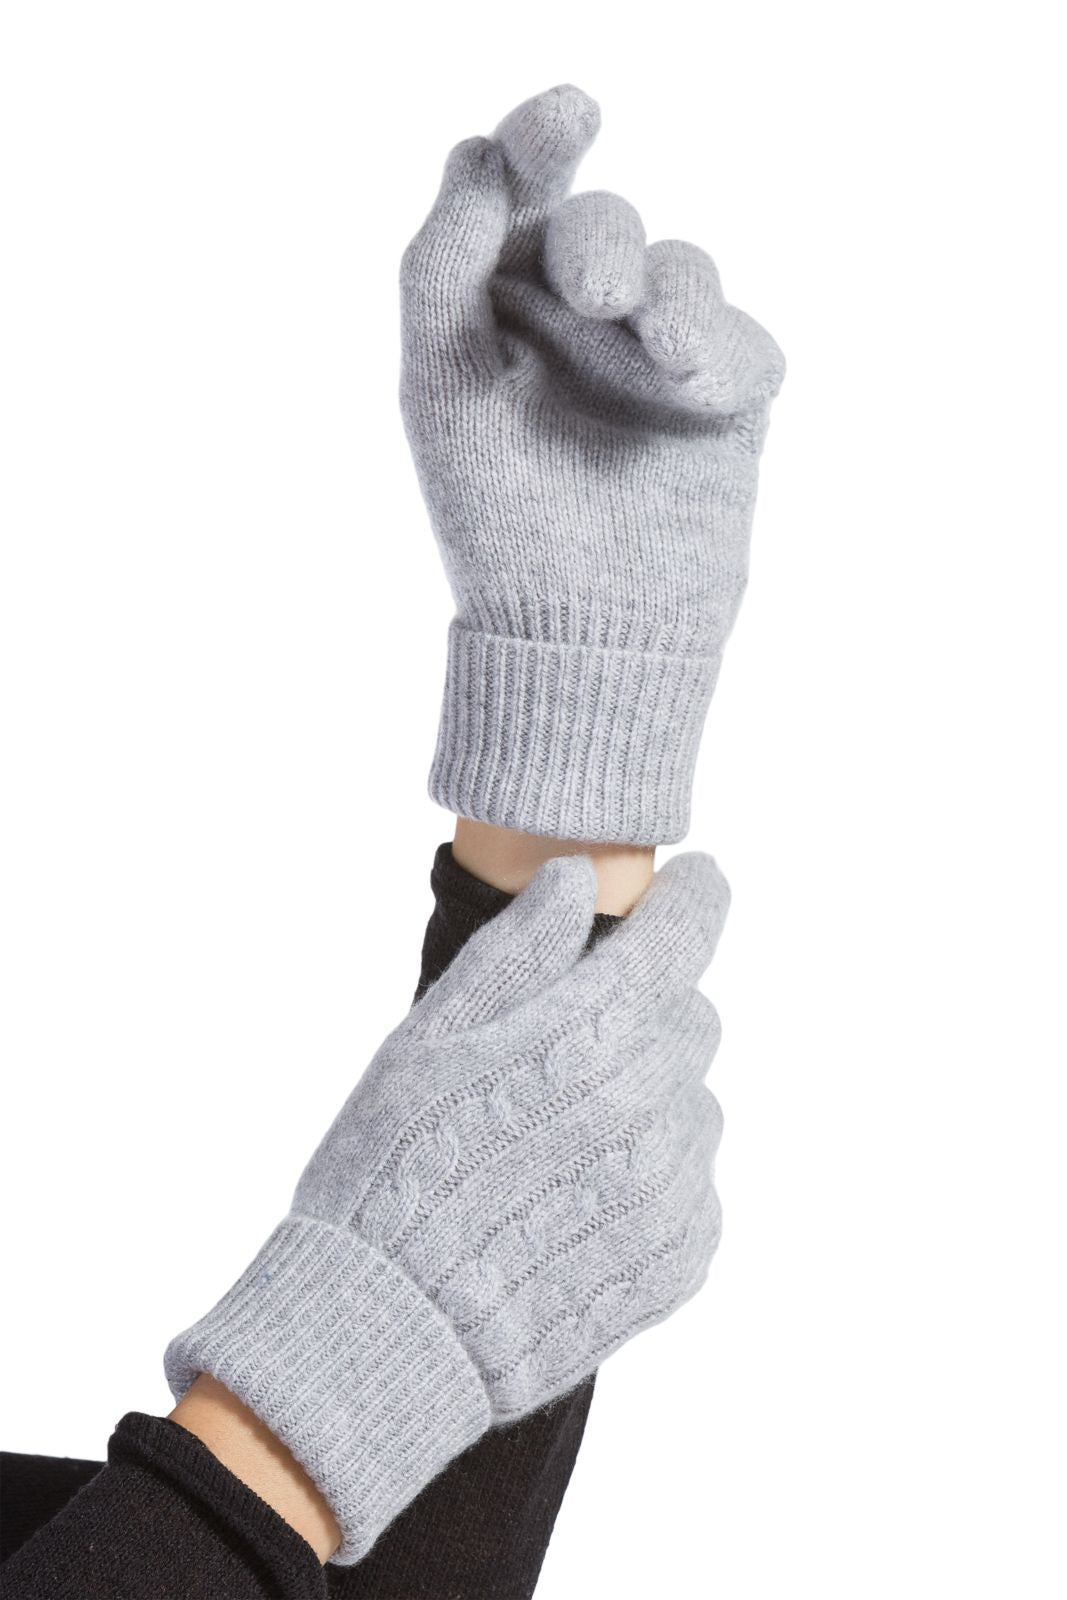 Woman's hands wearing Fishers Finery 100% cashmere cable knit winter gloves in light grey color